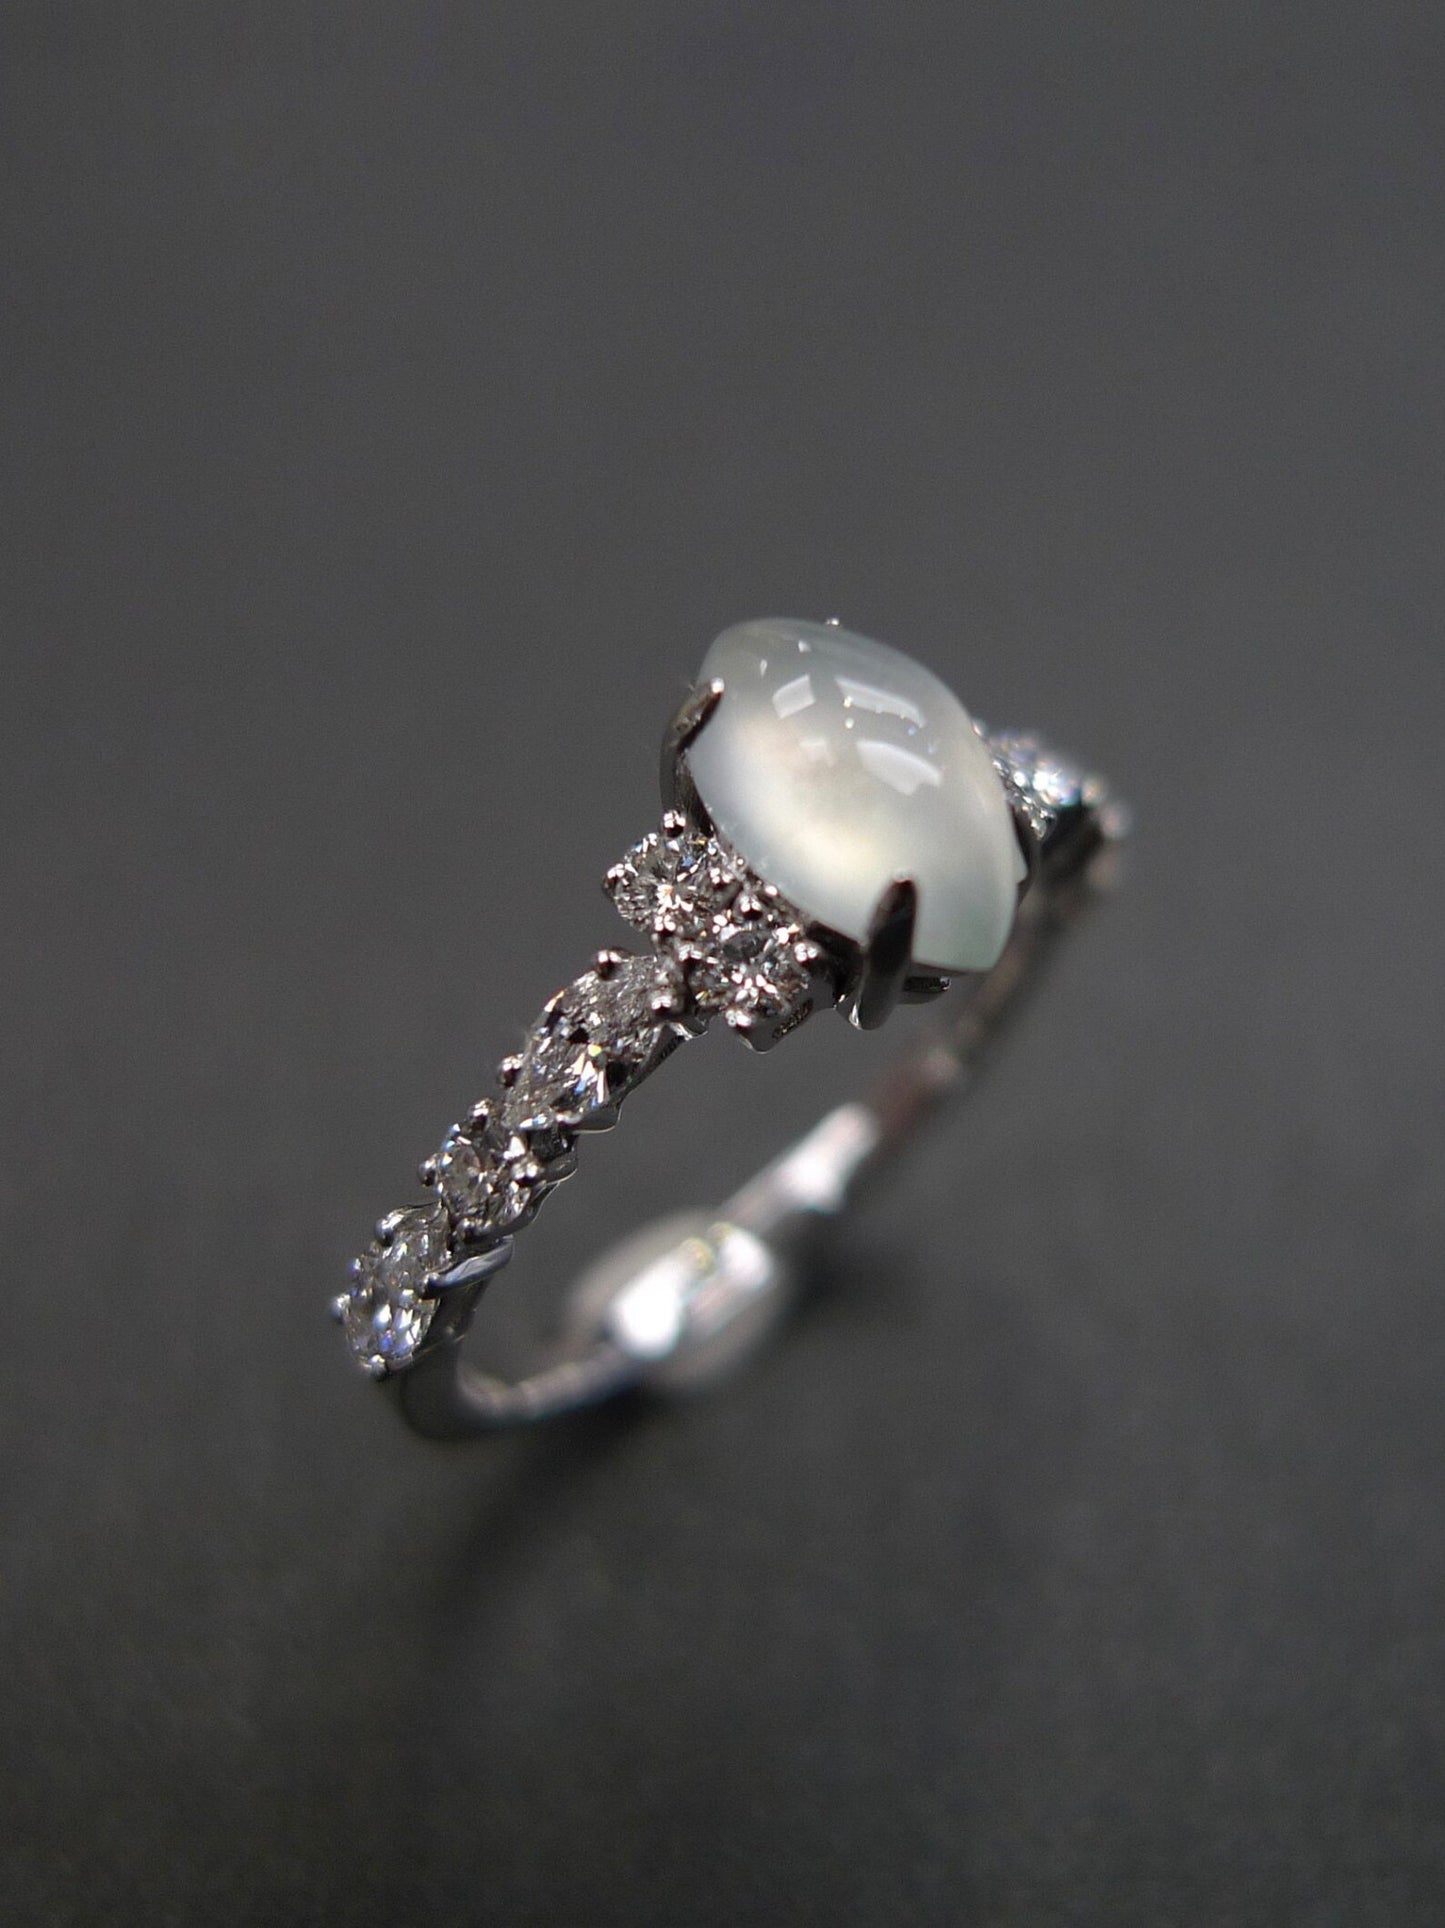 Certified Icy White Jade and Marquise Diamond Ring in White Gold - HN JEWELRY